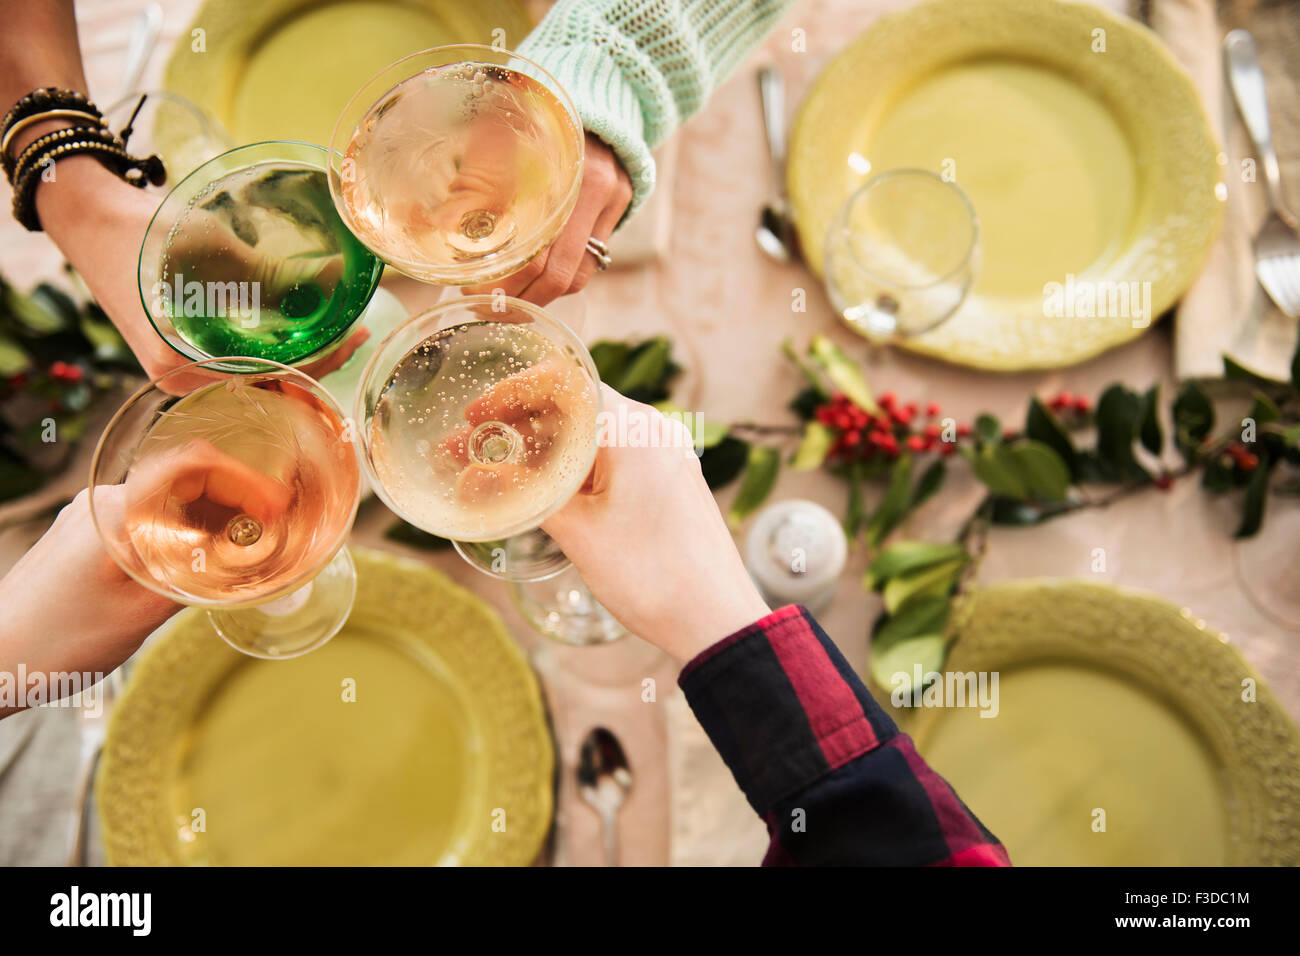 Personal perspective of people with martini glasses at festive table Stock Photo